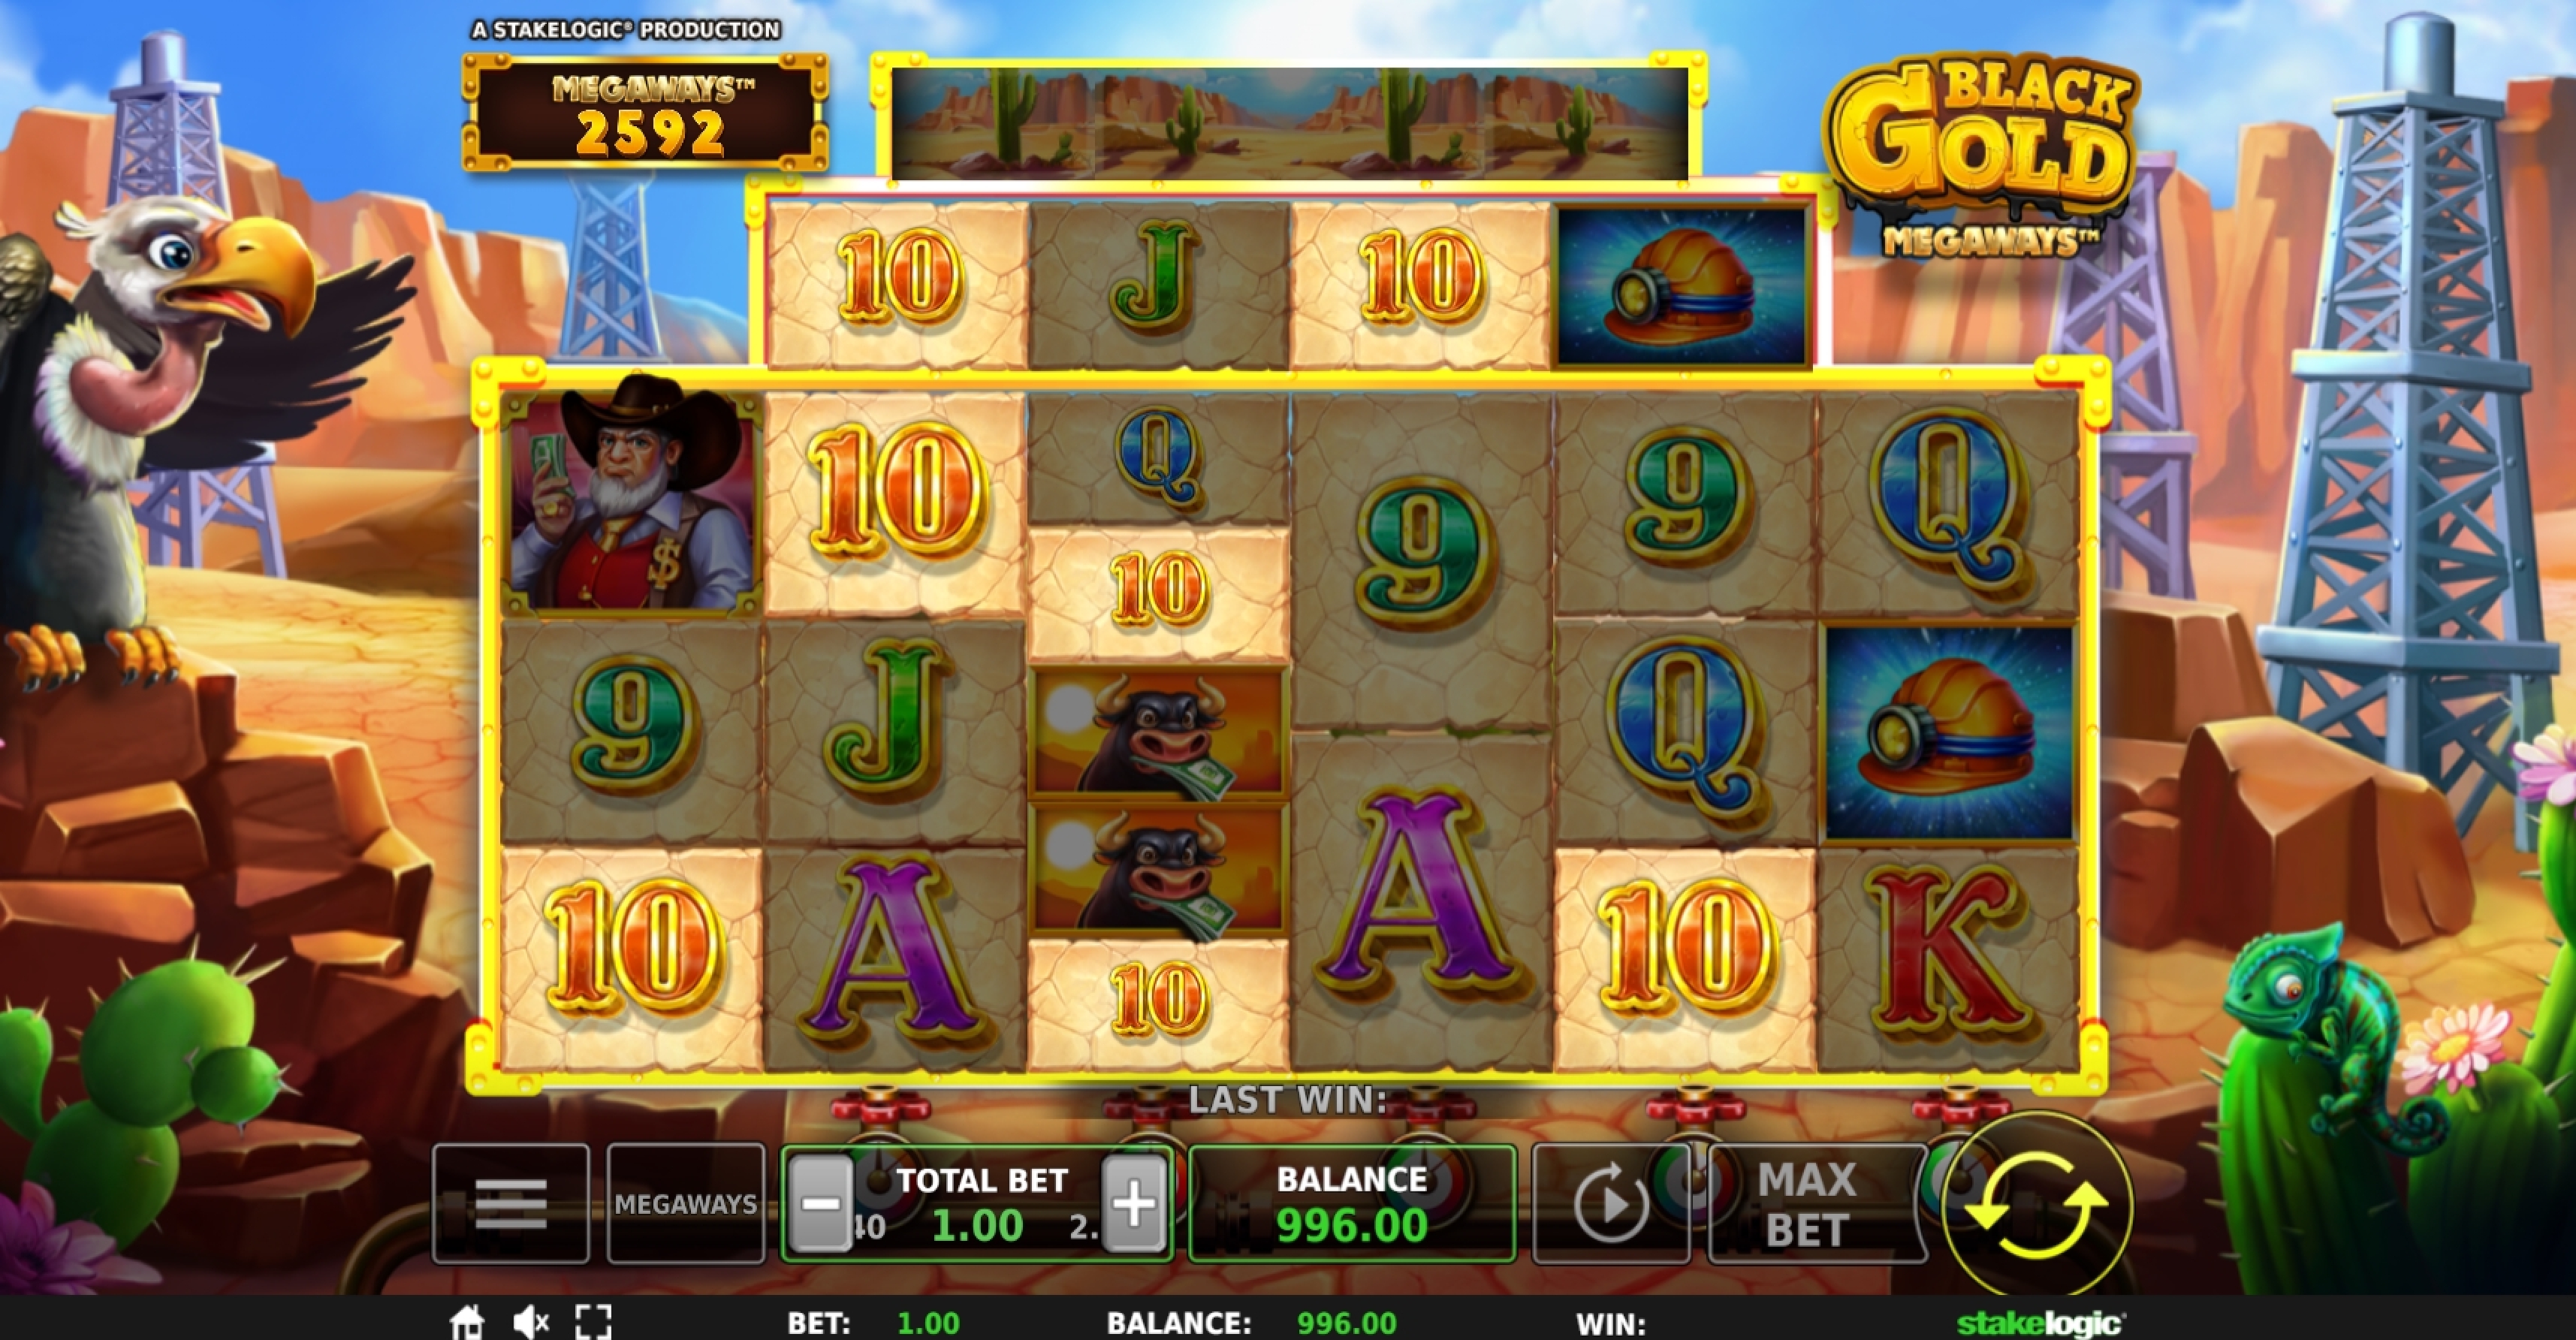 Win Money in Black Gold Megaways Free Slot Game by Stakelogic